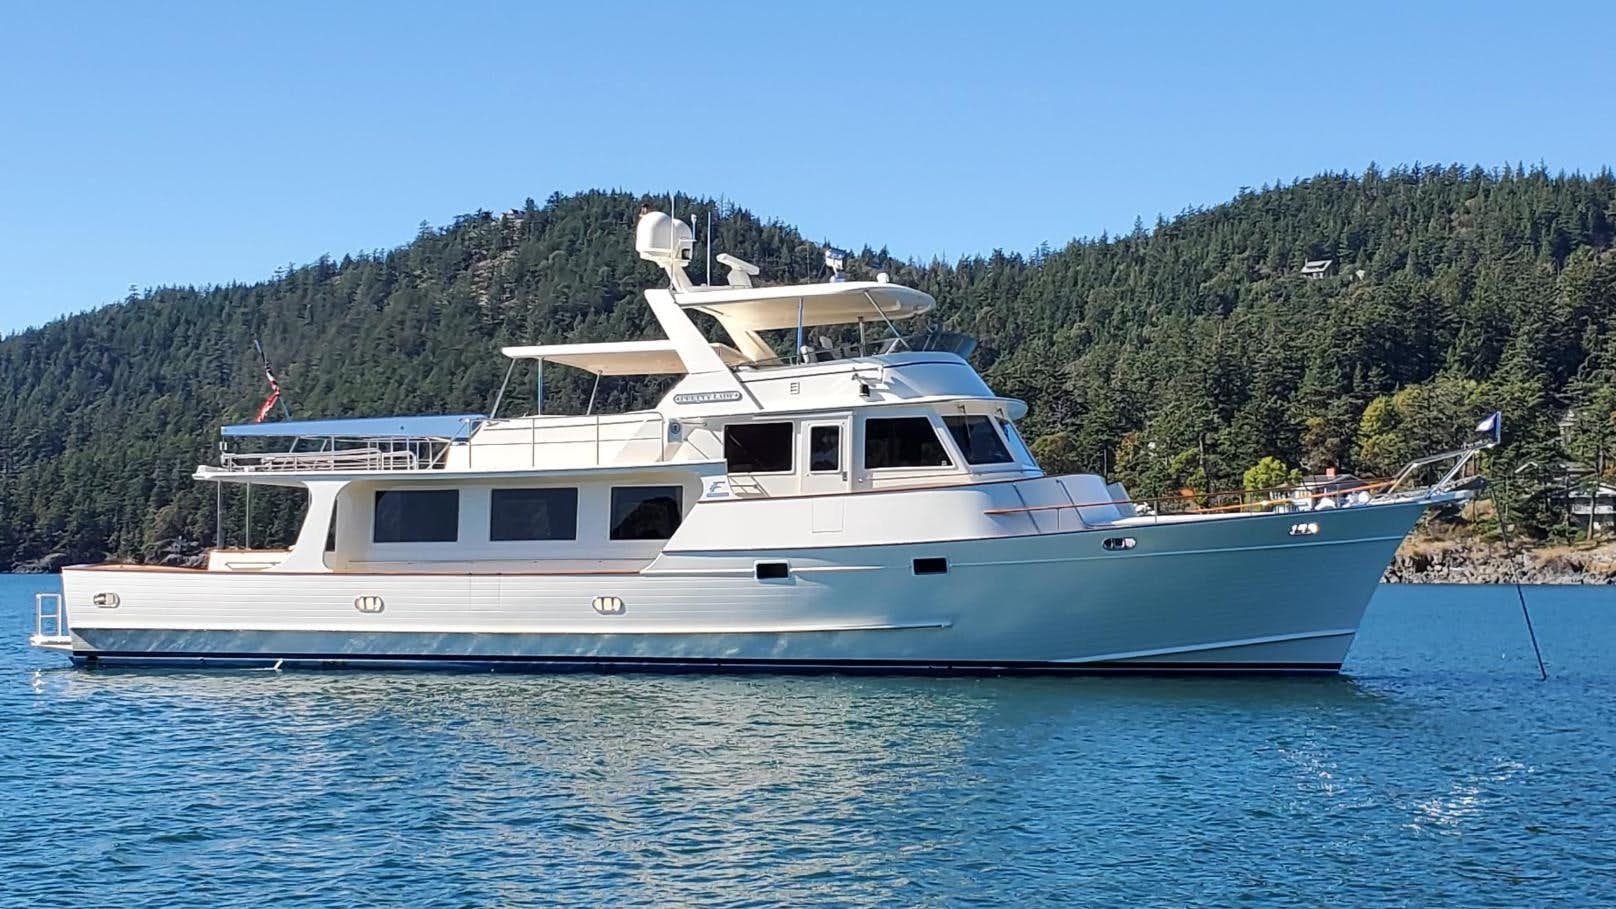 Watch Video for PRETTY LADY Yacht for Sale